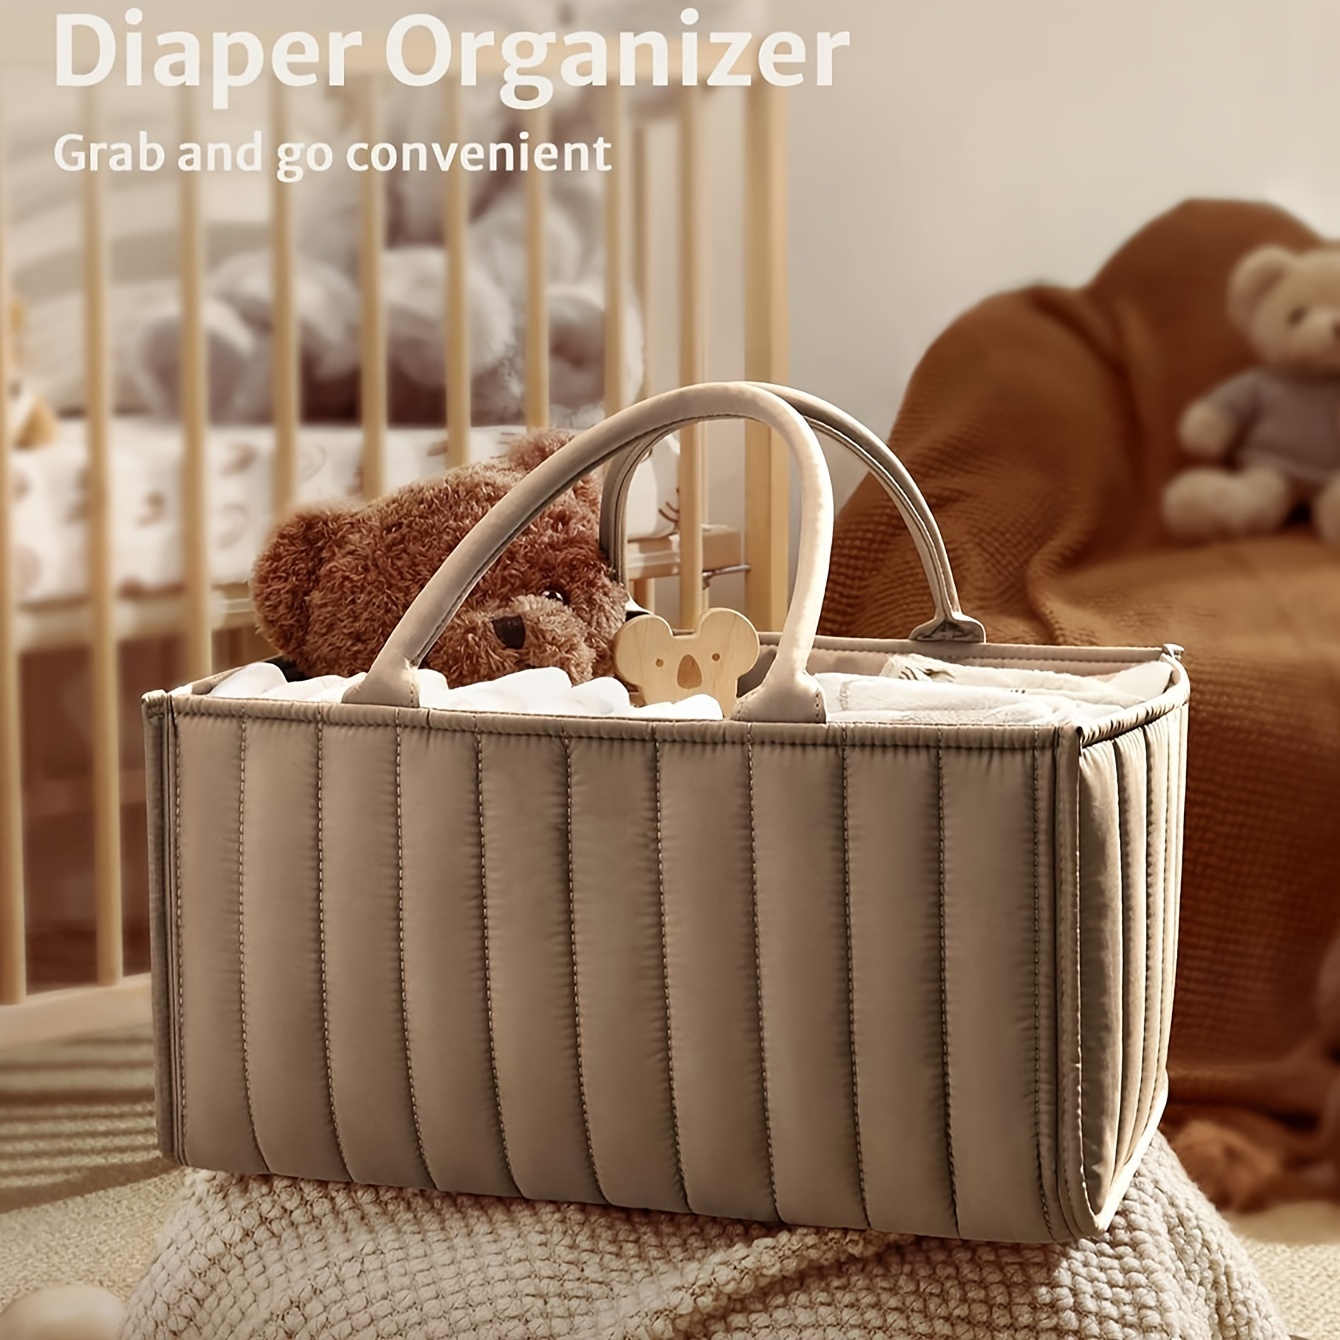 

Foldable Diaper Caddy Organizer – Adjustable Rectangle Polyester Tote With Compartments For Nursery, Portable Lightweight Car Storage Box & Travel Basket